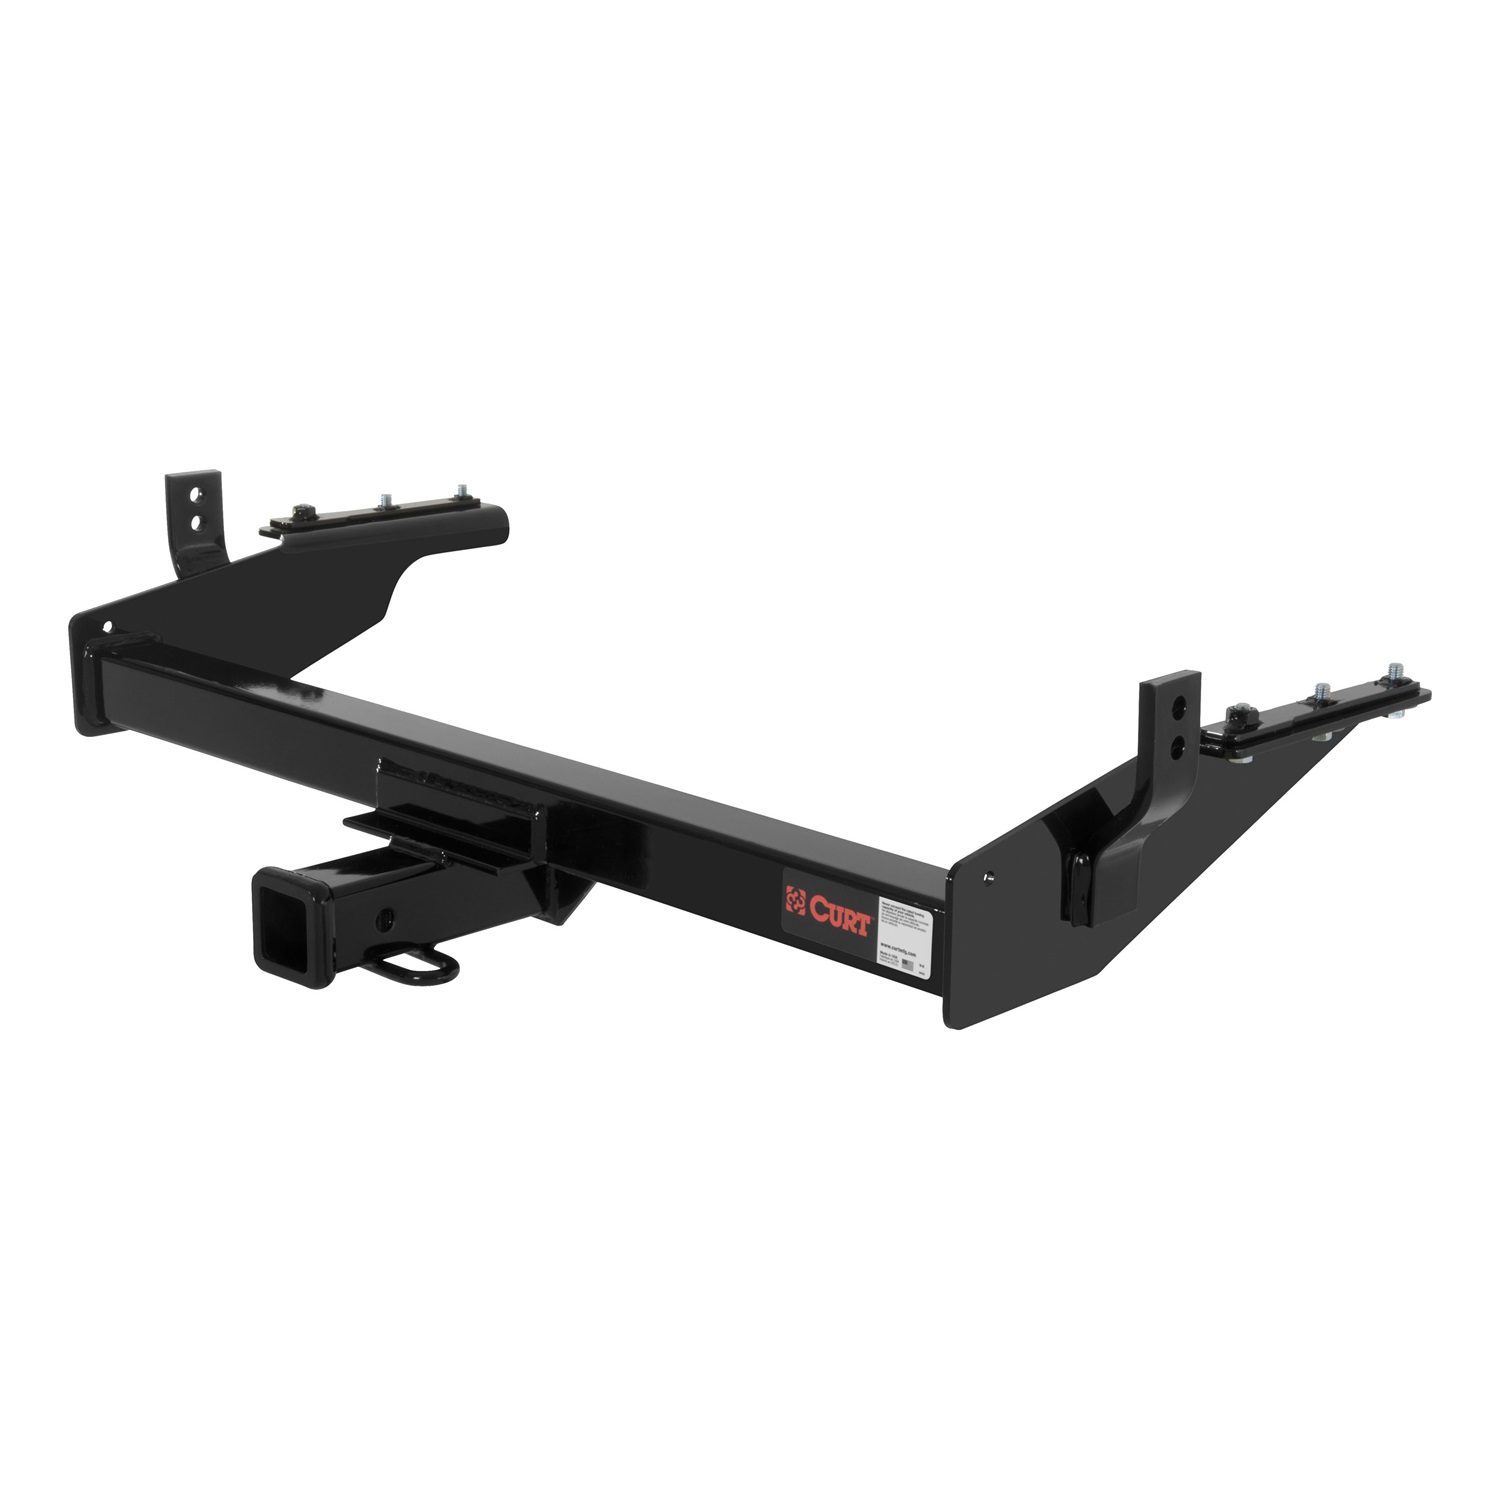 CURT Manufacturing CURT Manufacturing 13842 Class III; 2 in. Receiver Hitch 03-04 Fits Frontier